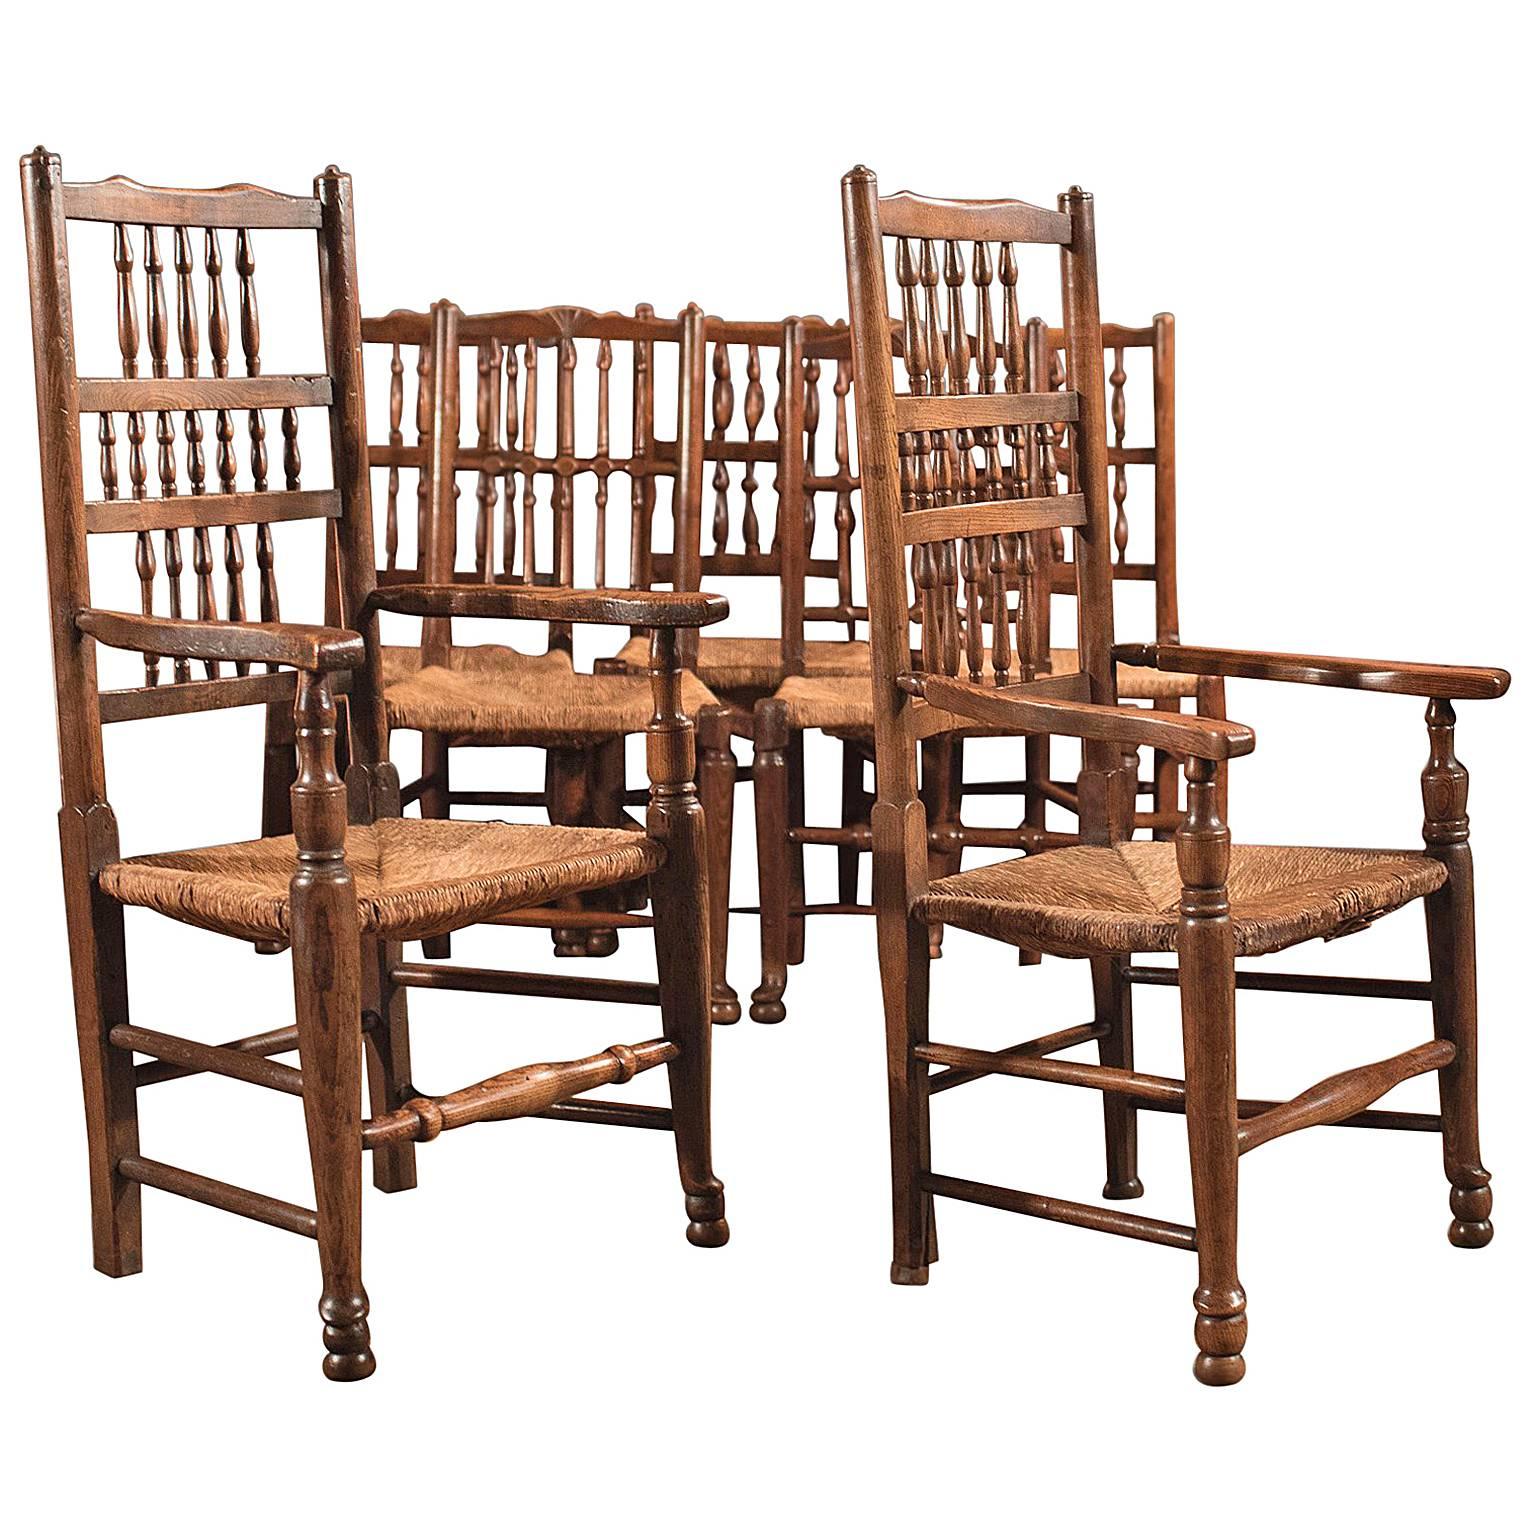 Harlequin Set of Seven Antique Spindle Back Dining Chairs, circa 1800